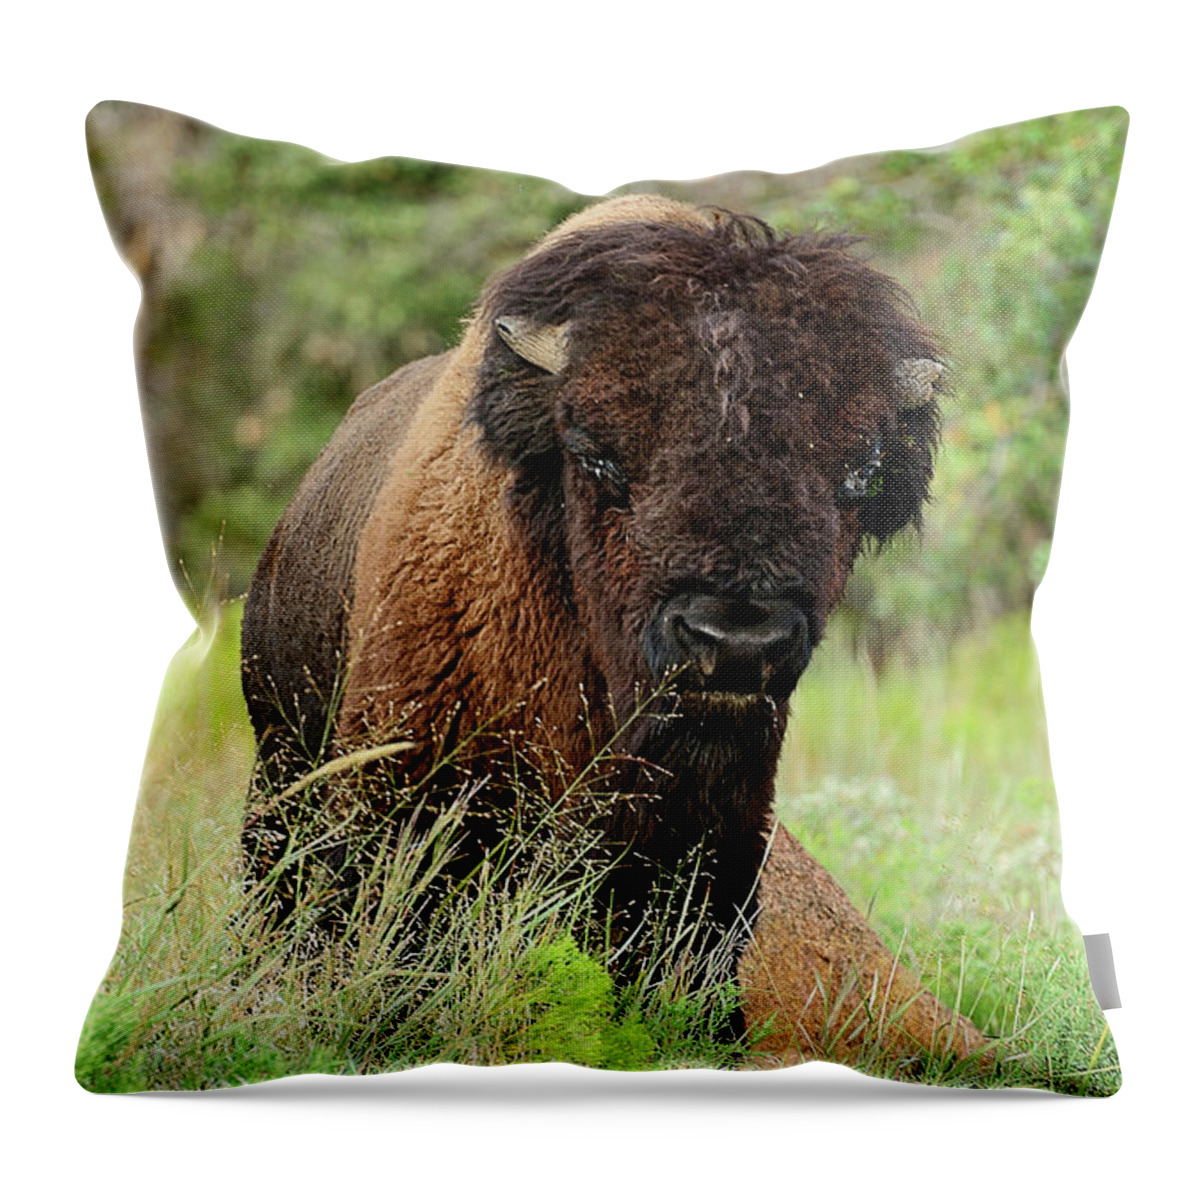 Estock Throw Pillow featuring the digital art American Bison by Heeb Photos